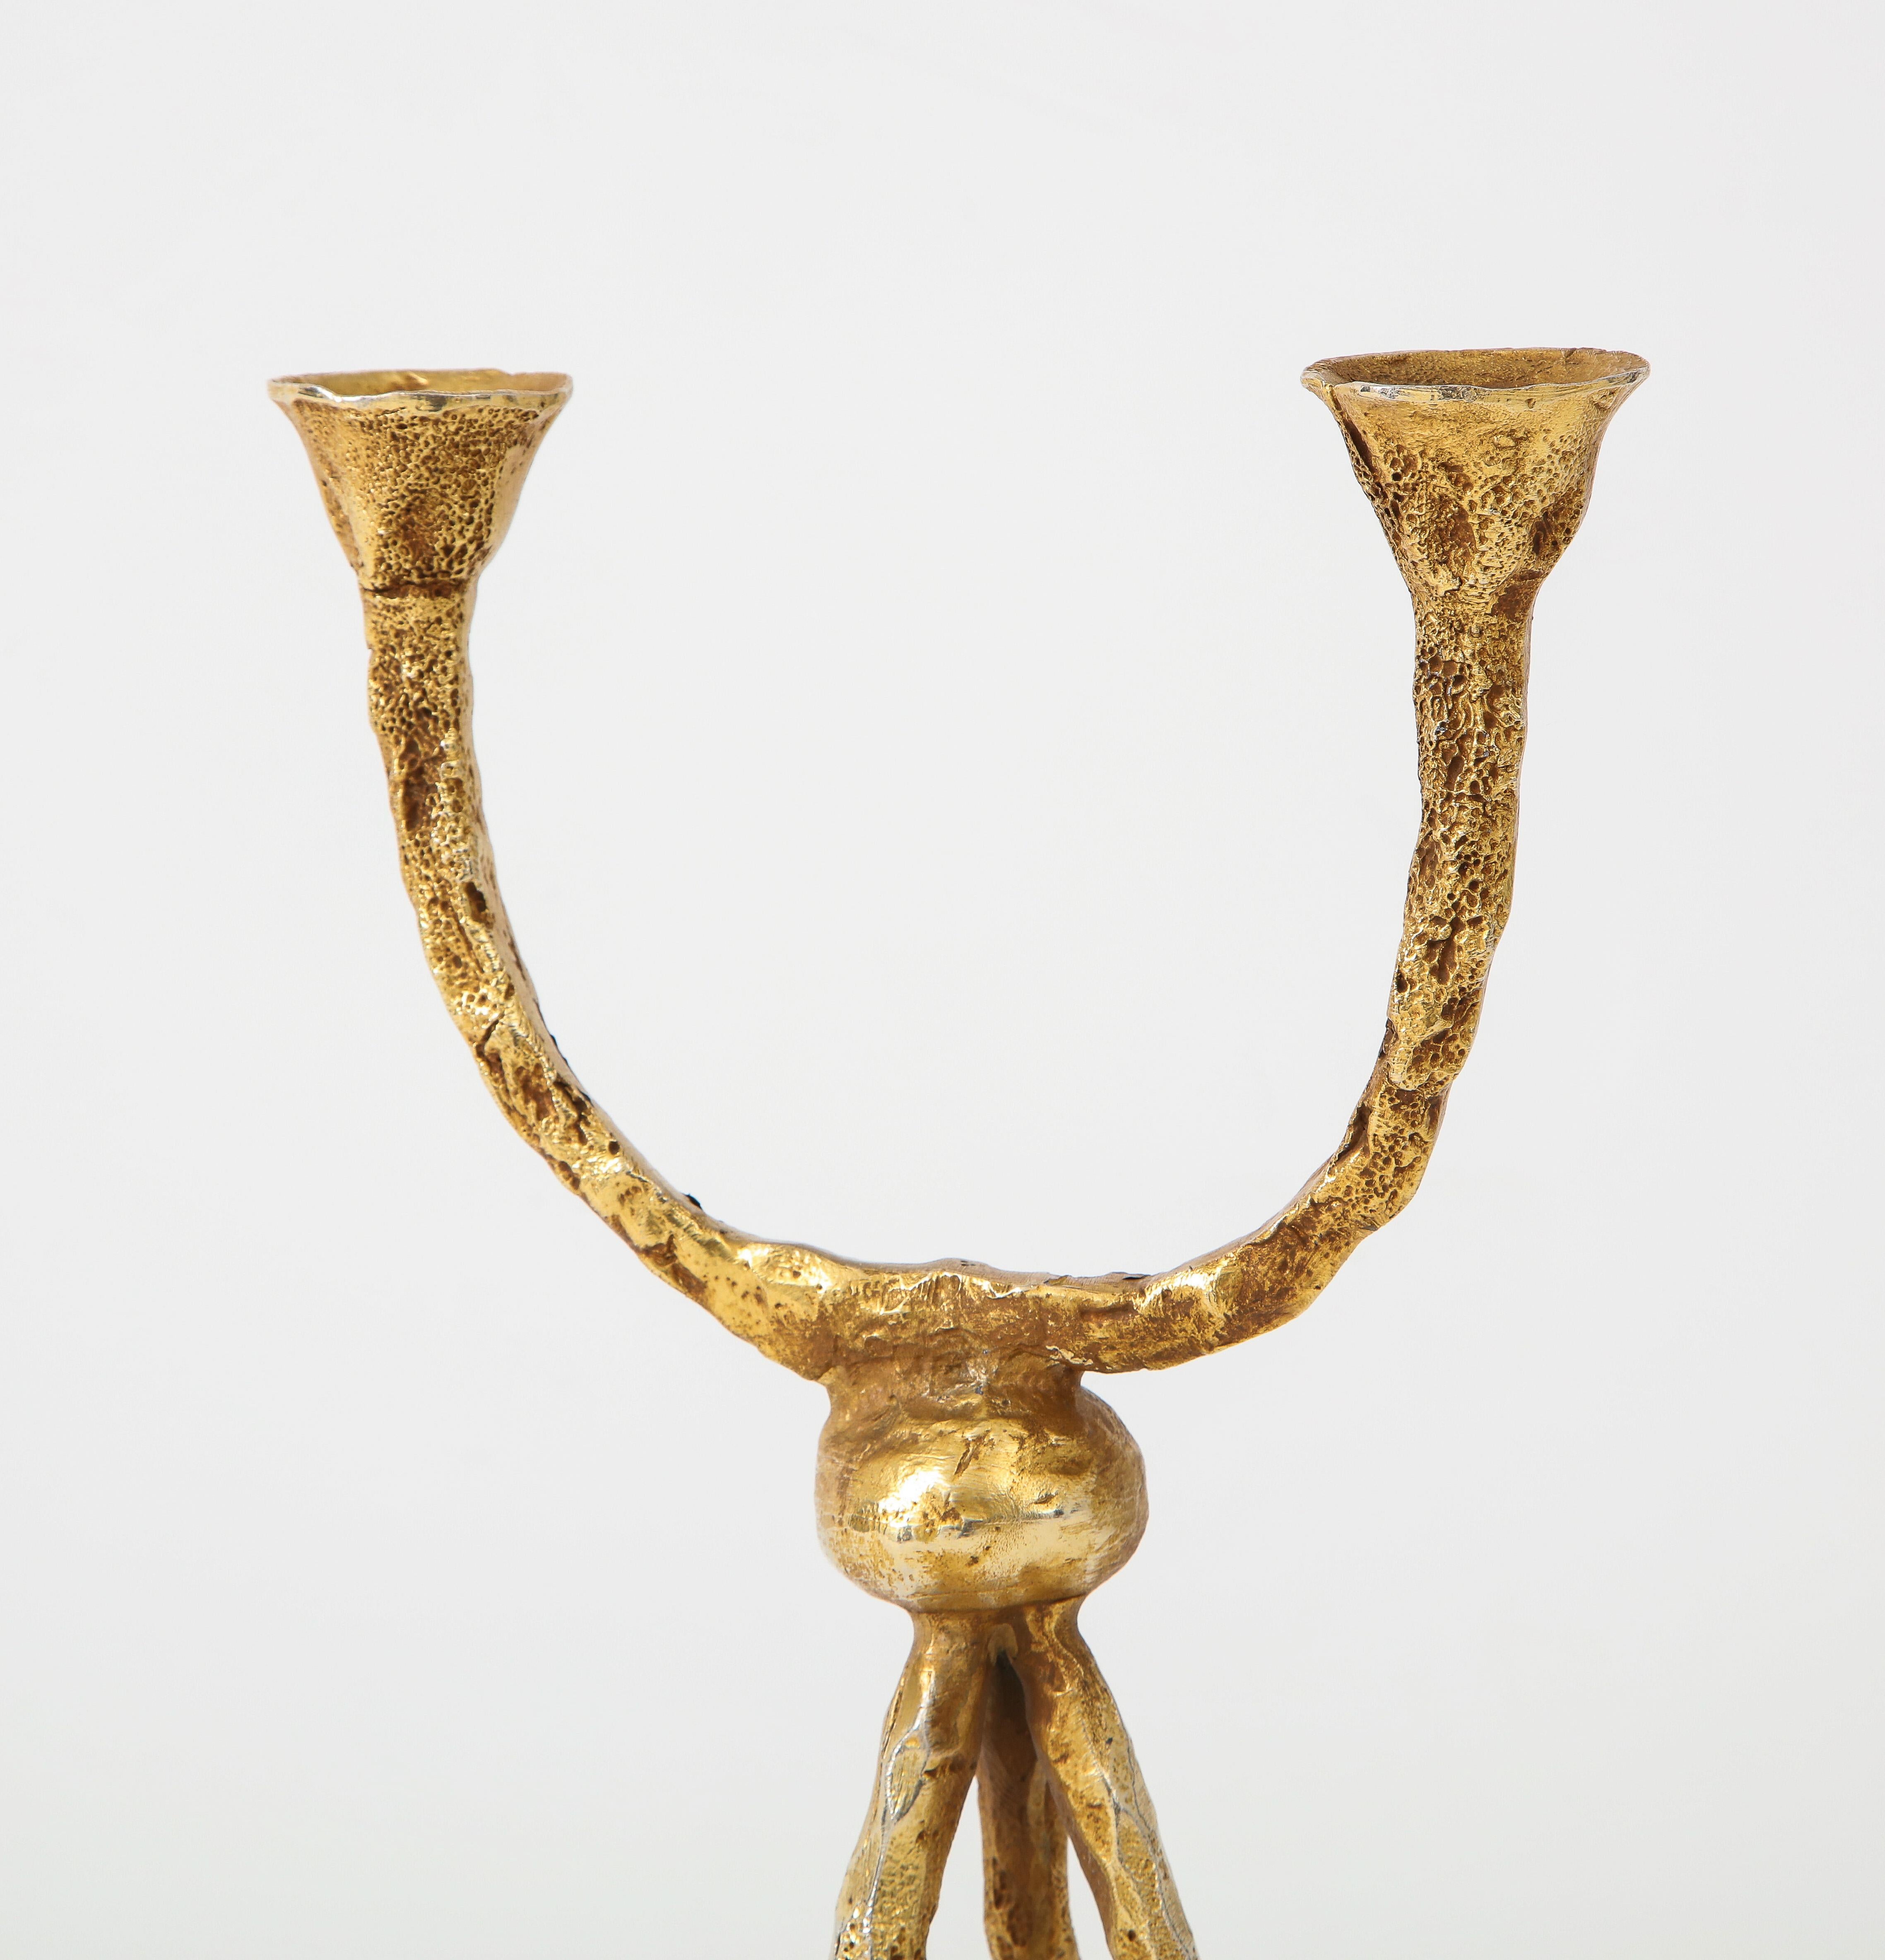 French Pierre Casenove Gilded Bronze Two-Arm Candlestick for Fondica